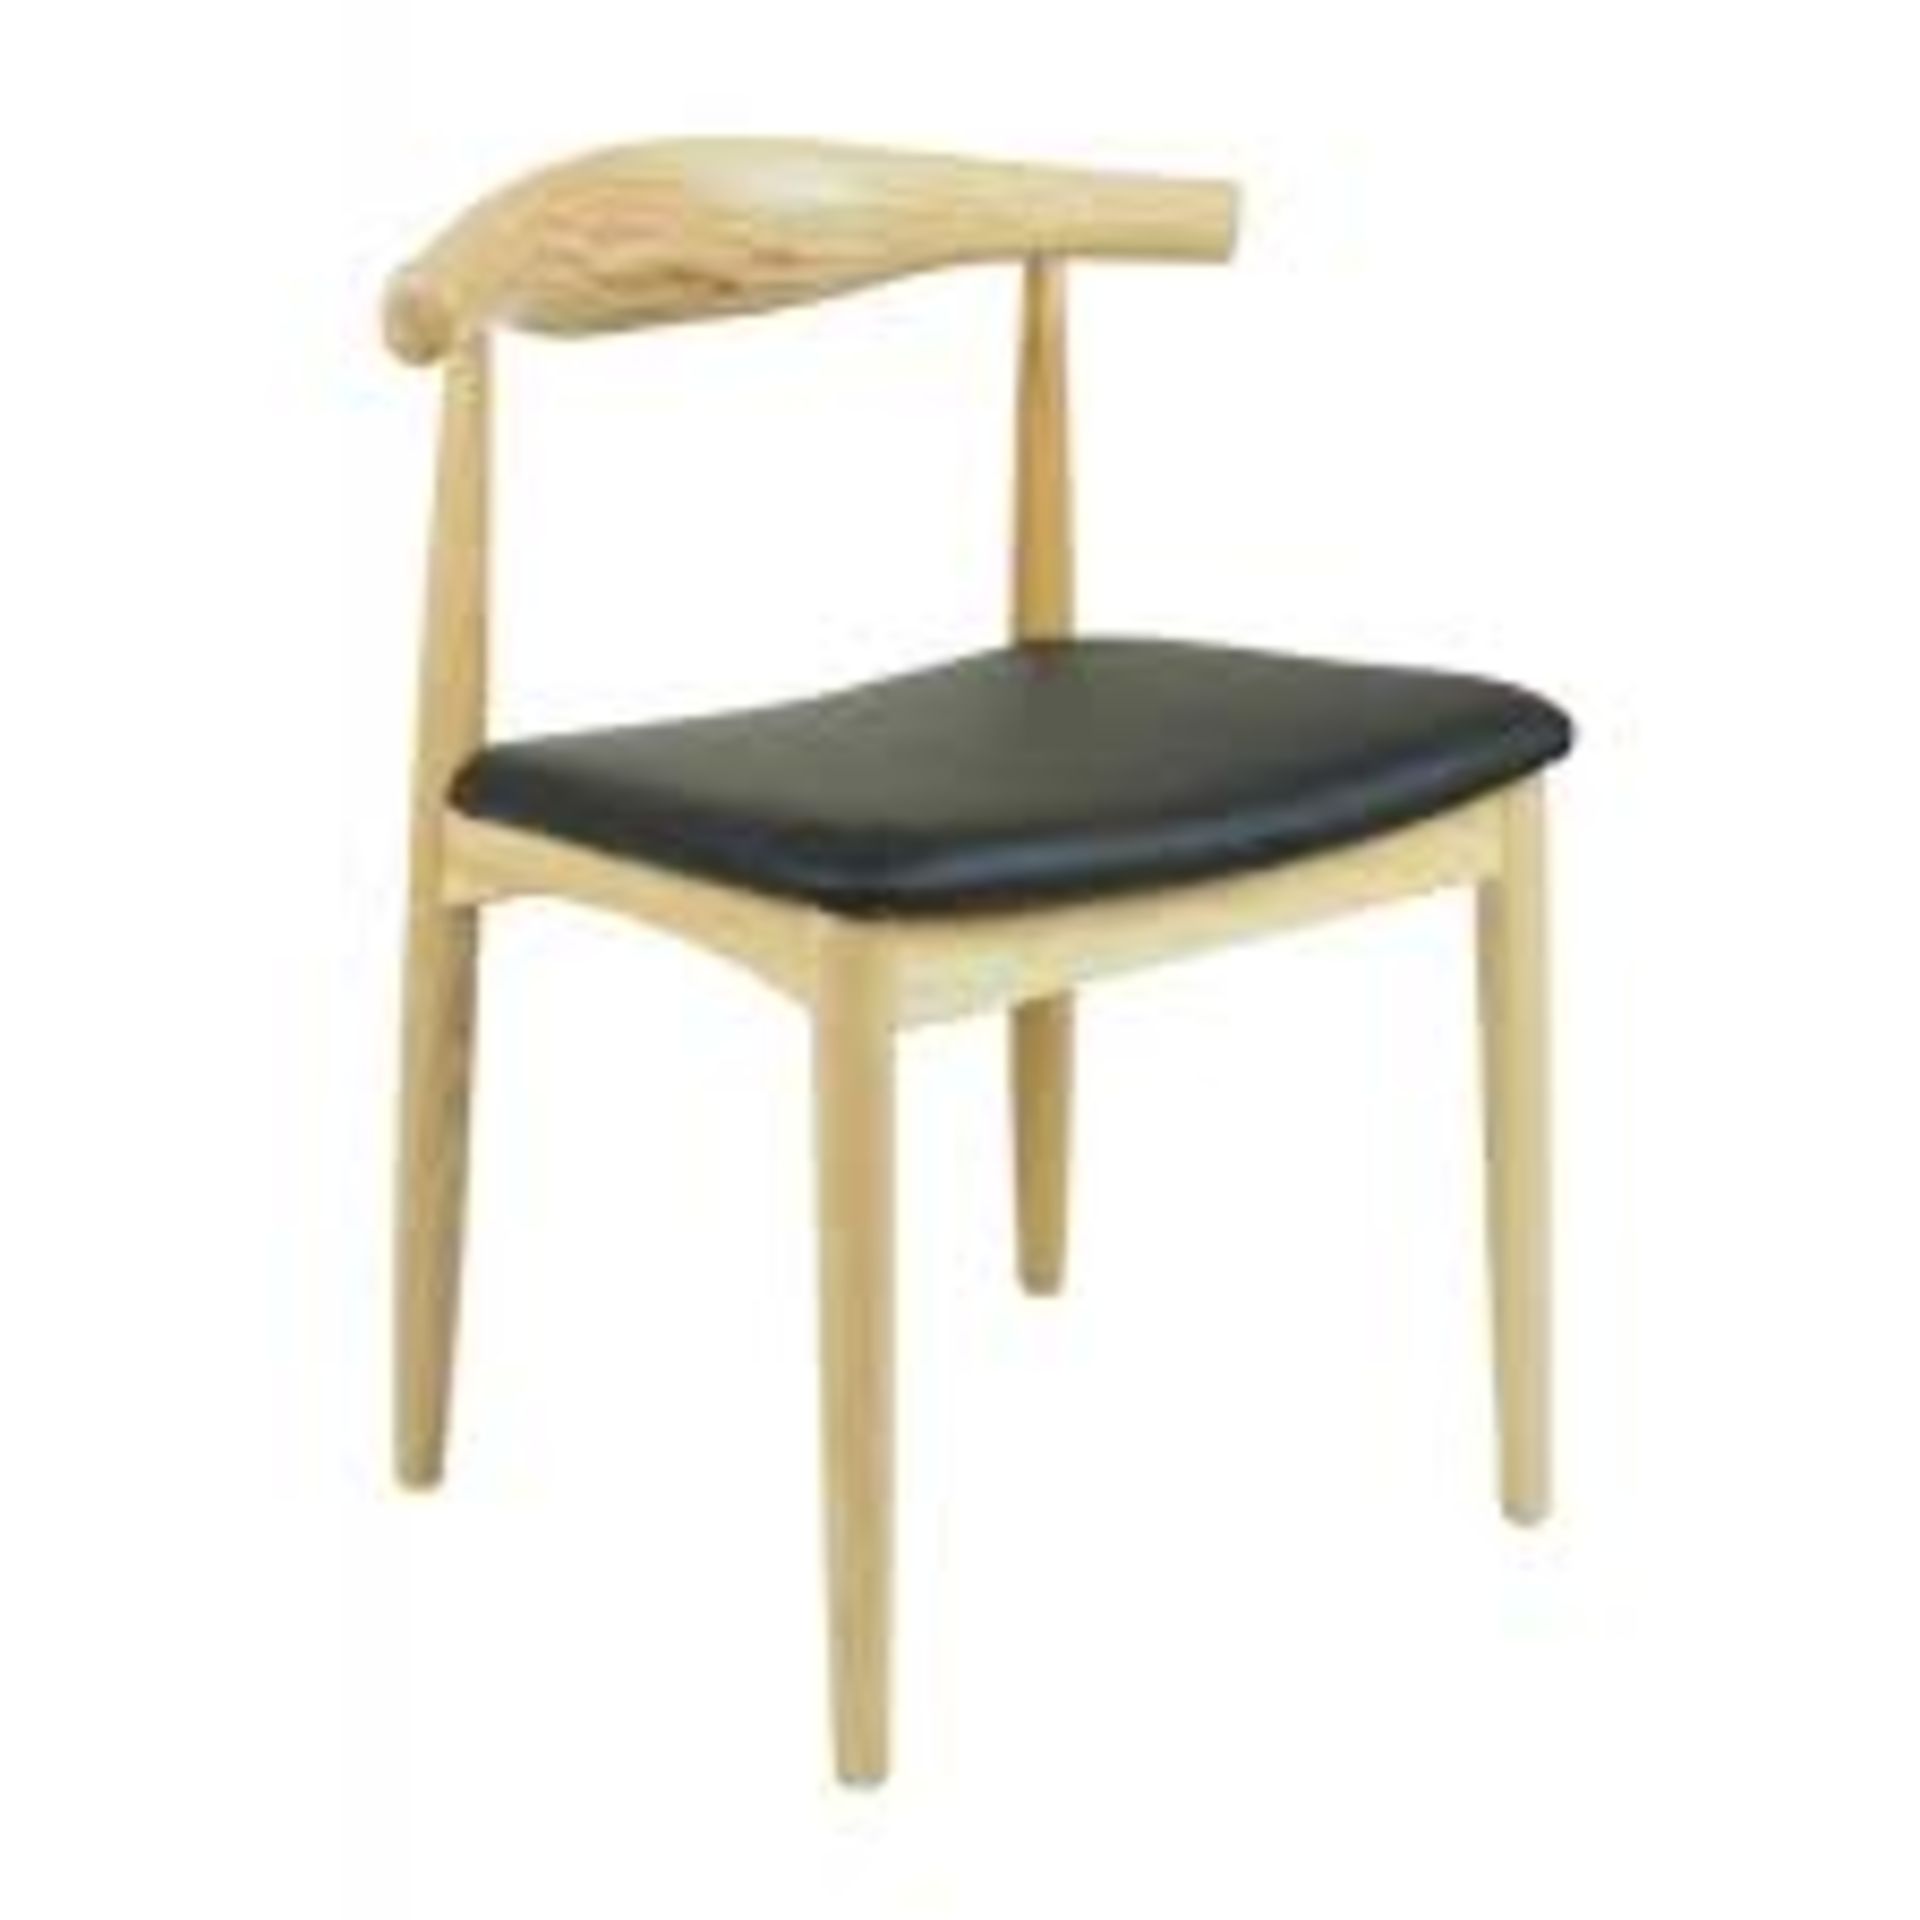 4 x Hans Wegner Inspired Elbow Chair - Solid Wood With Light Stain Ash Finish And Black Seat Pad - - Image 2 of 7